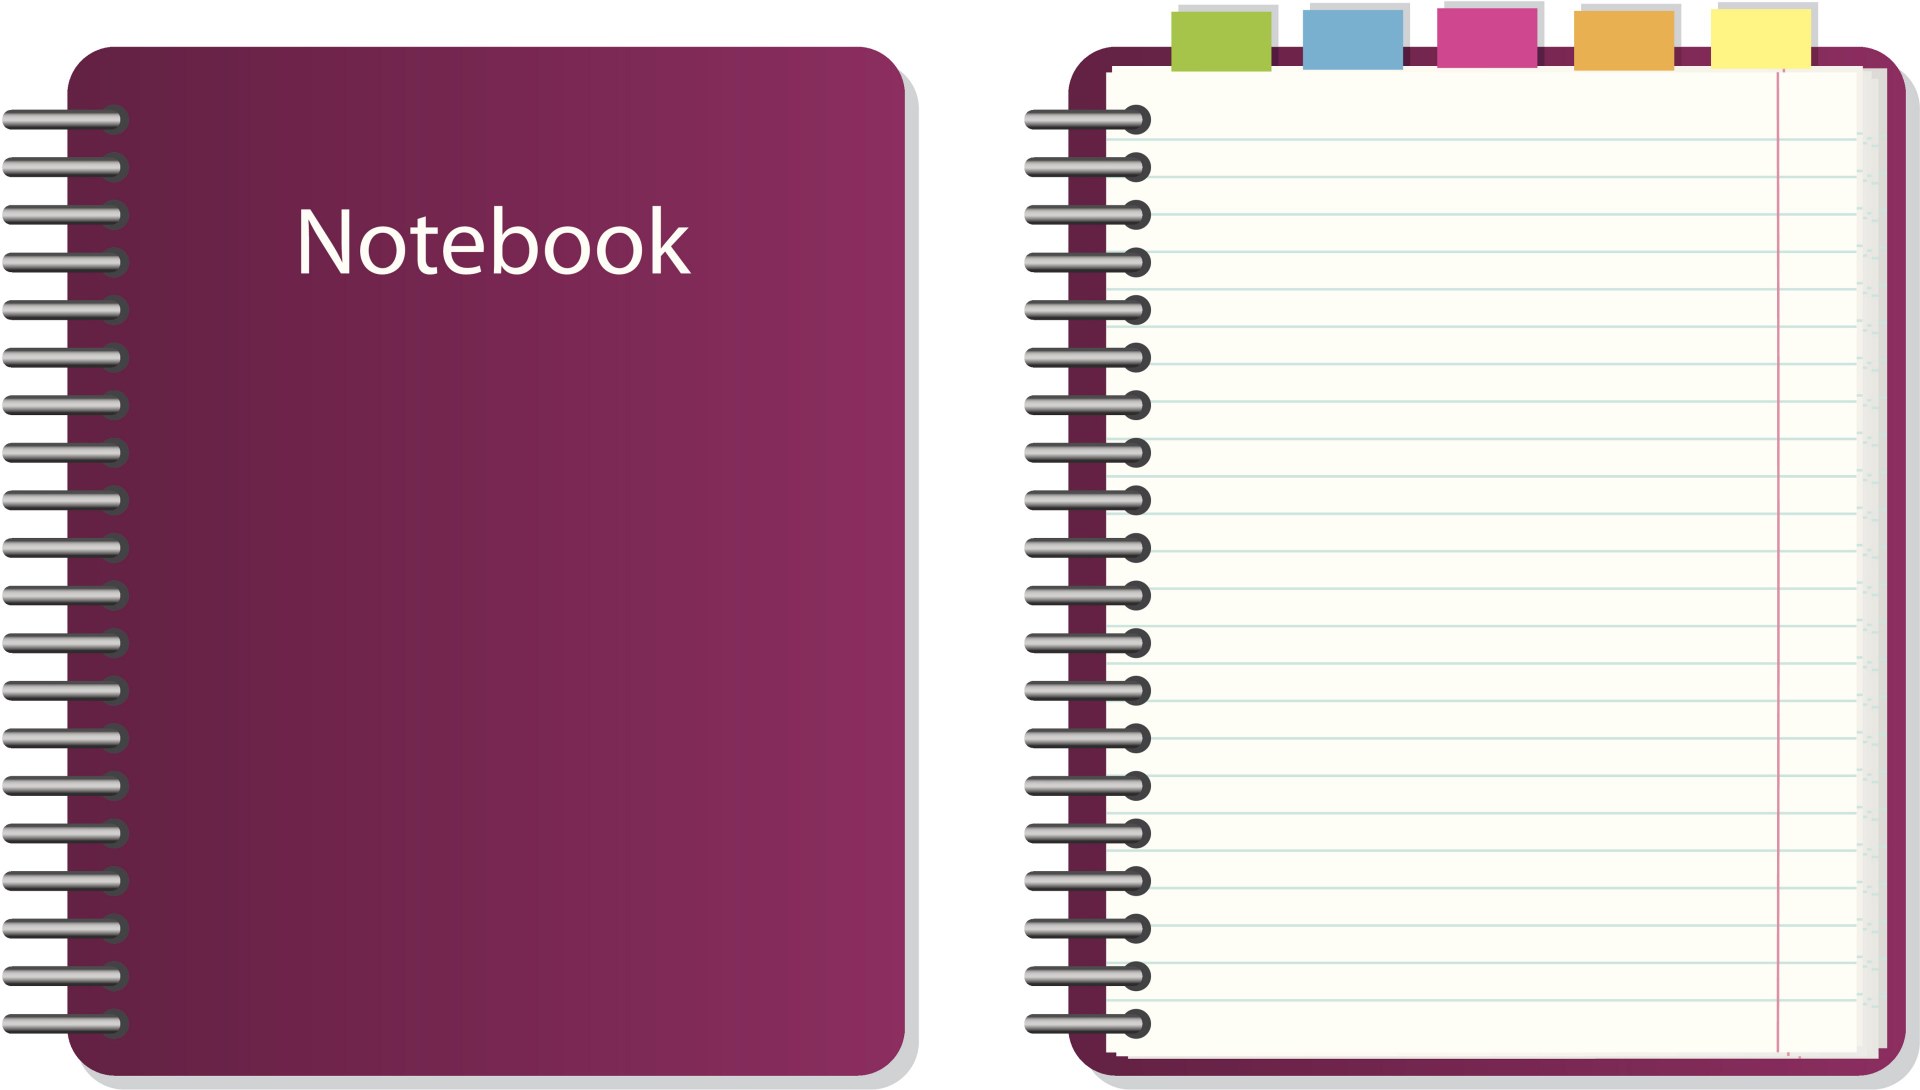 Change Color Of Notebooks In Onenote